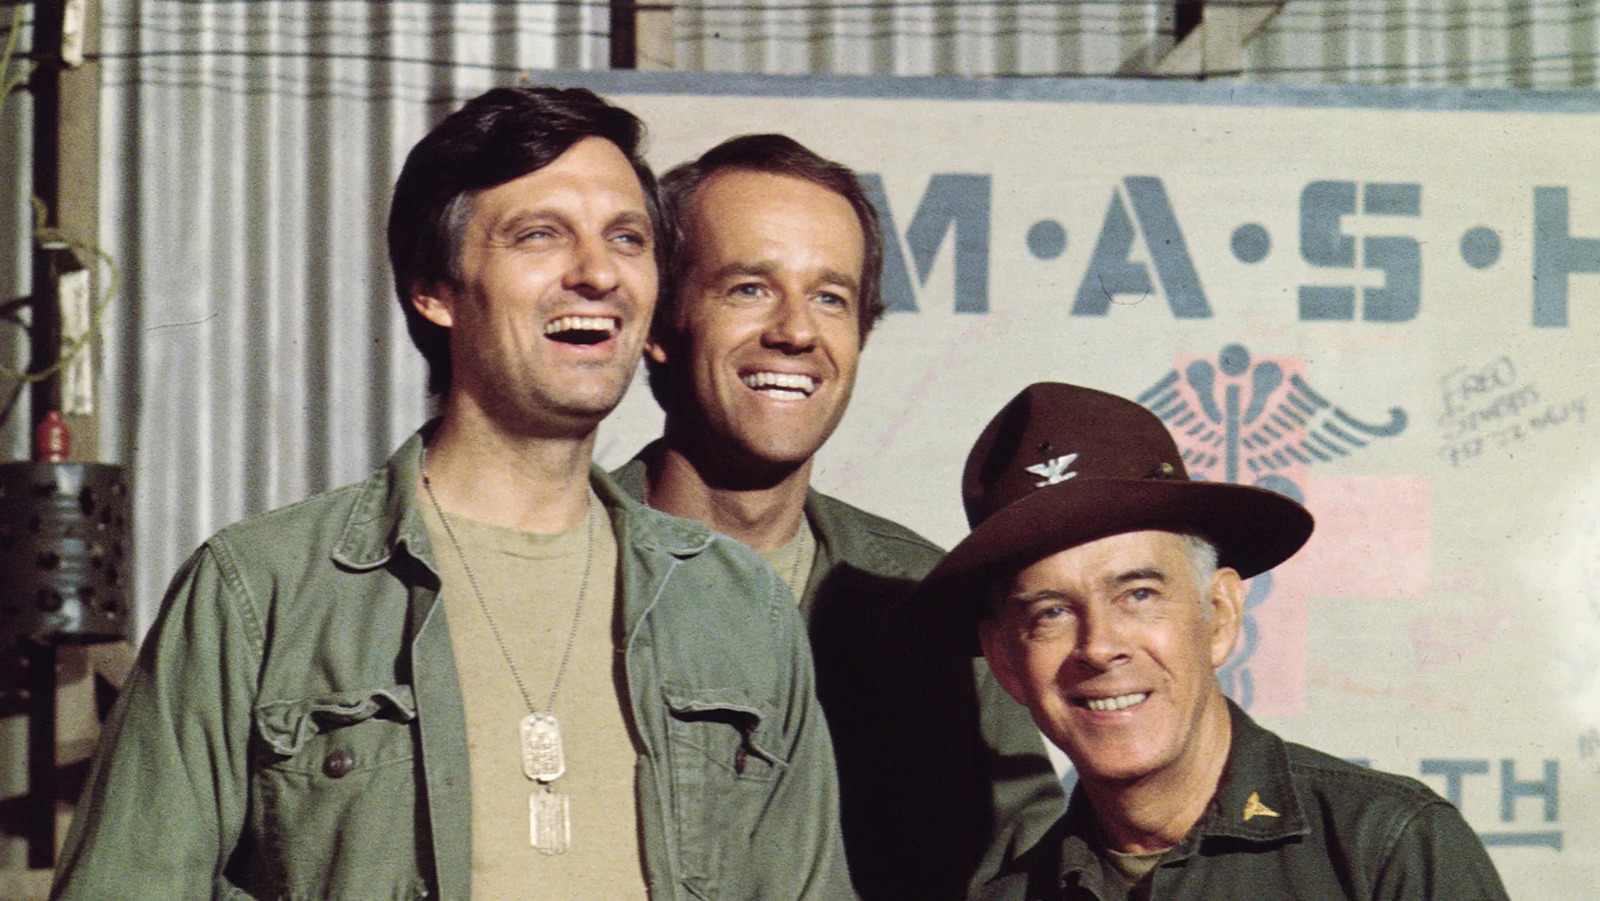 #M*A*S*H Is An Endlessly Groundbreaking Anti-War Sitcom